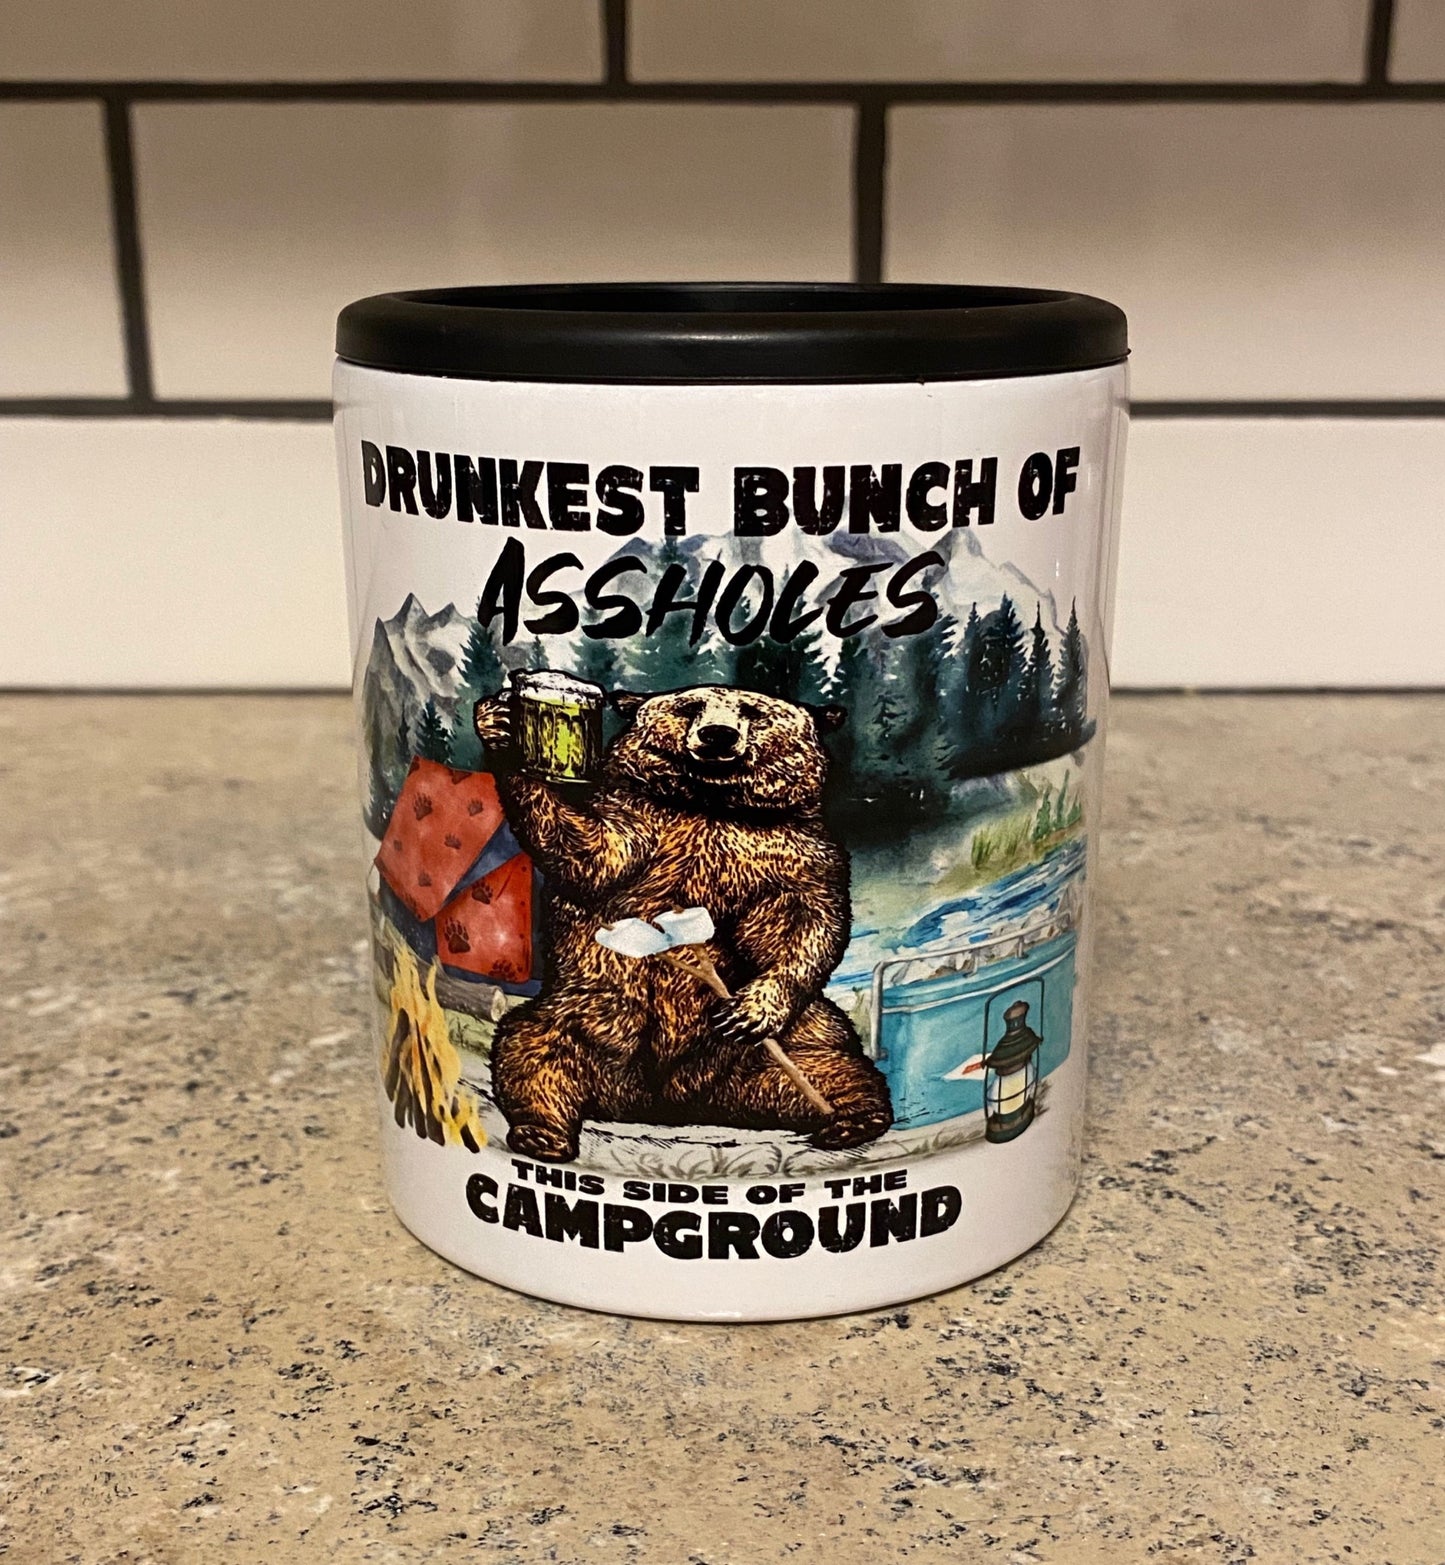 12oz "Drunkest Bunch of A$$holes This Side of The Campground" Classic Steel Koozie